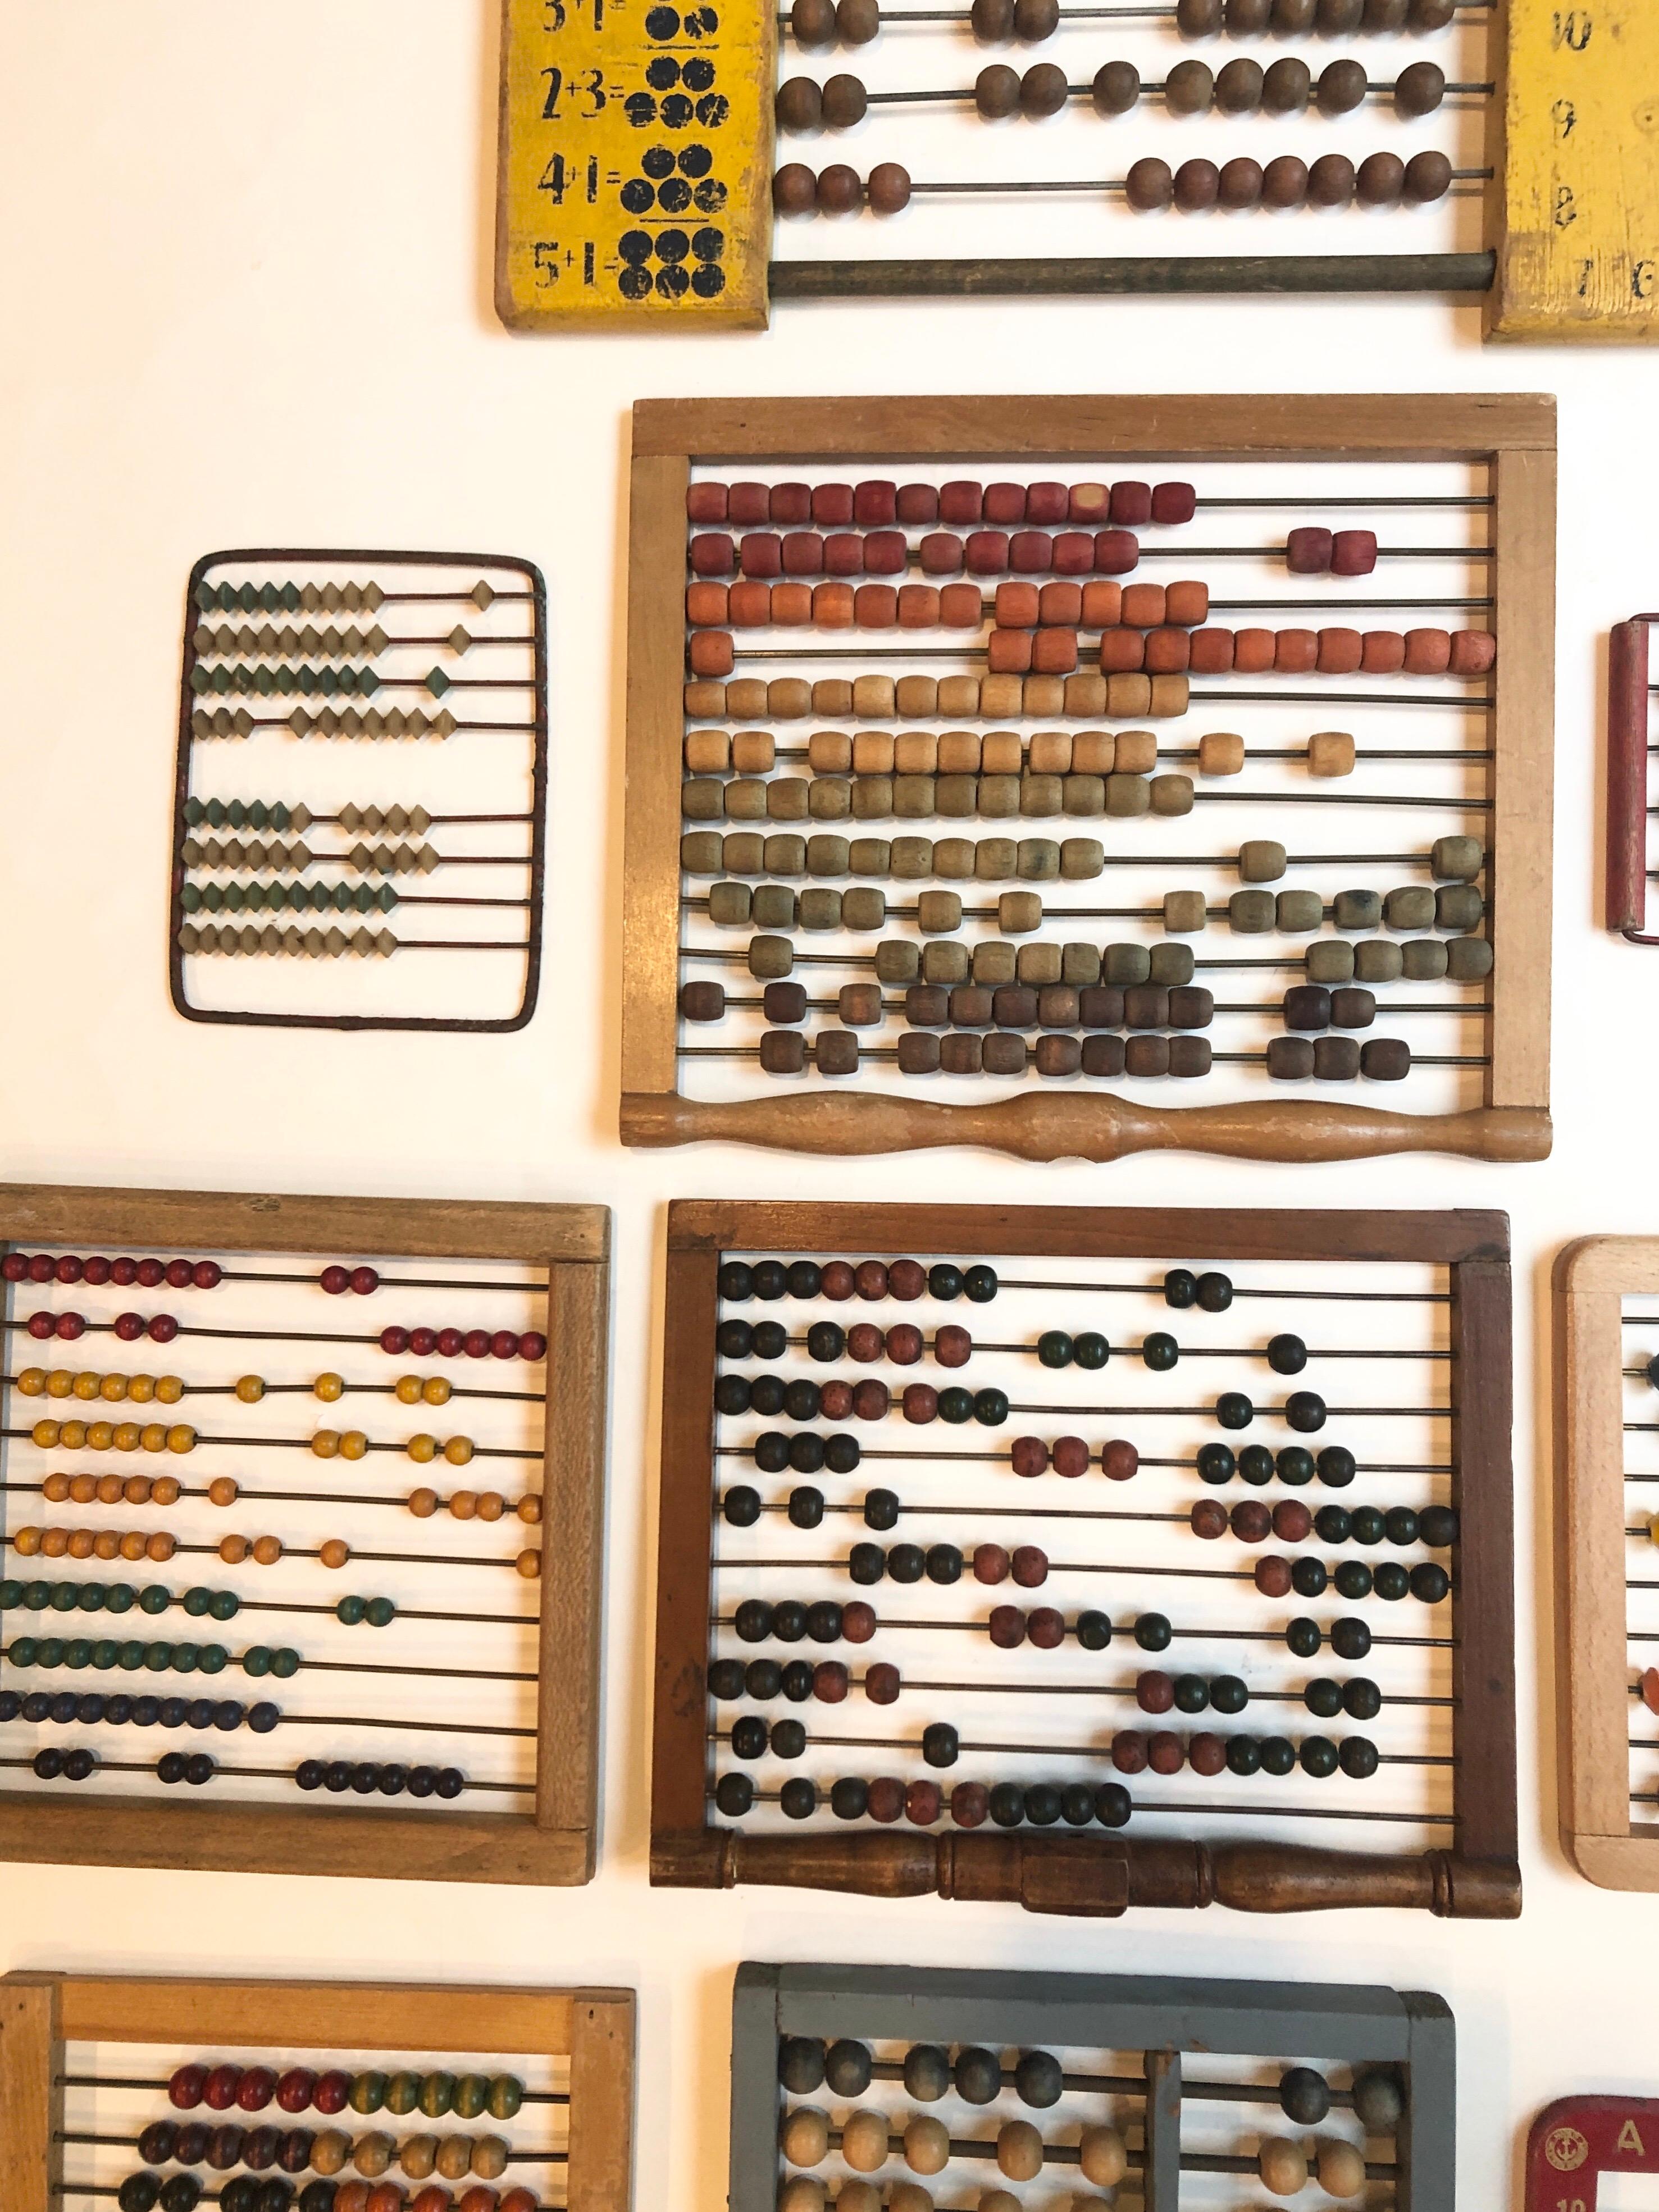 Unknown Vintage and Antique Colorful Child’s Abacus Collection